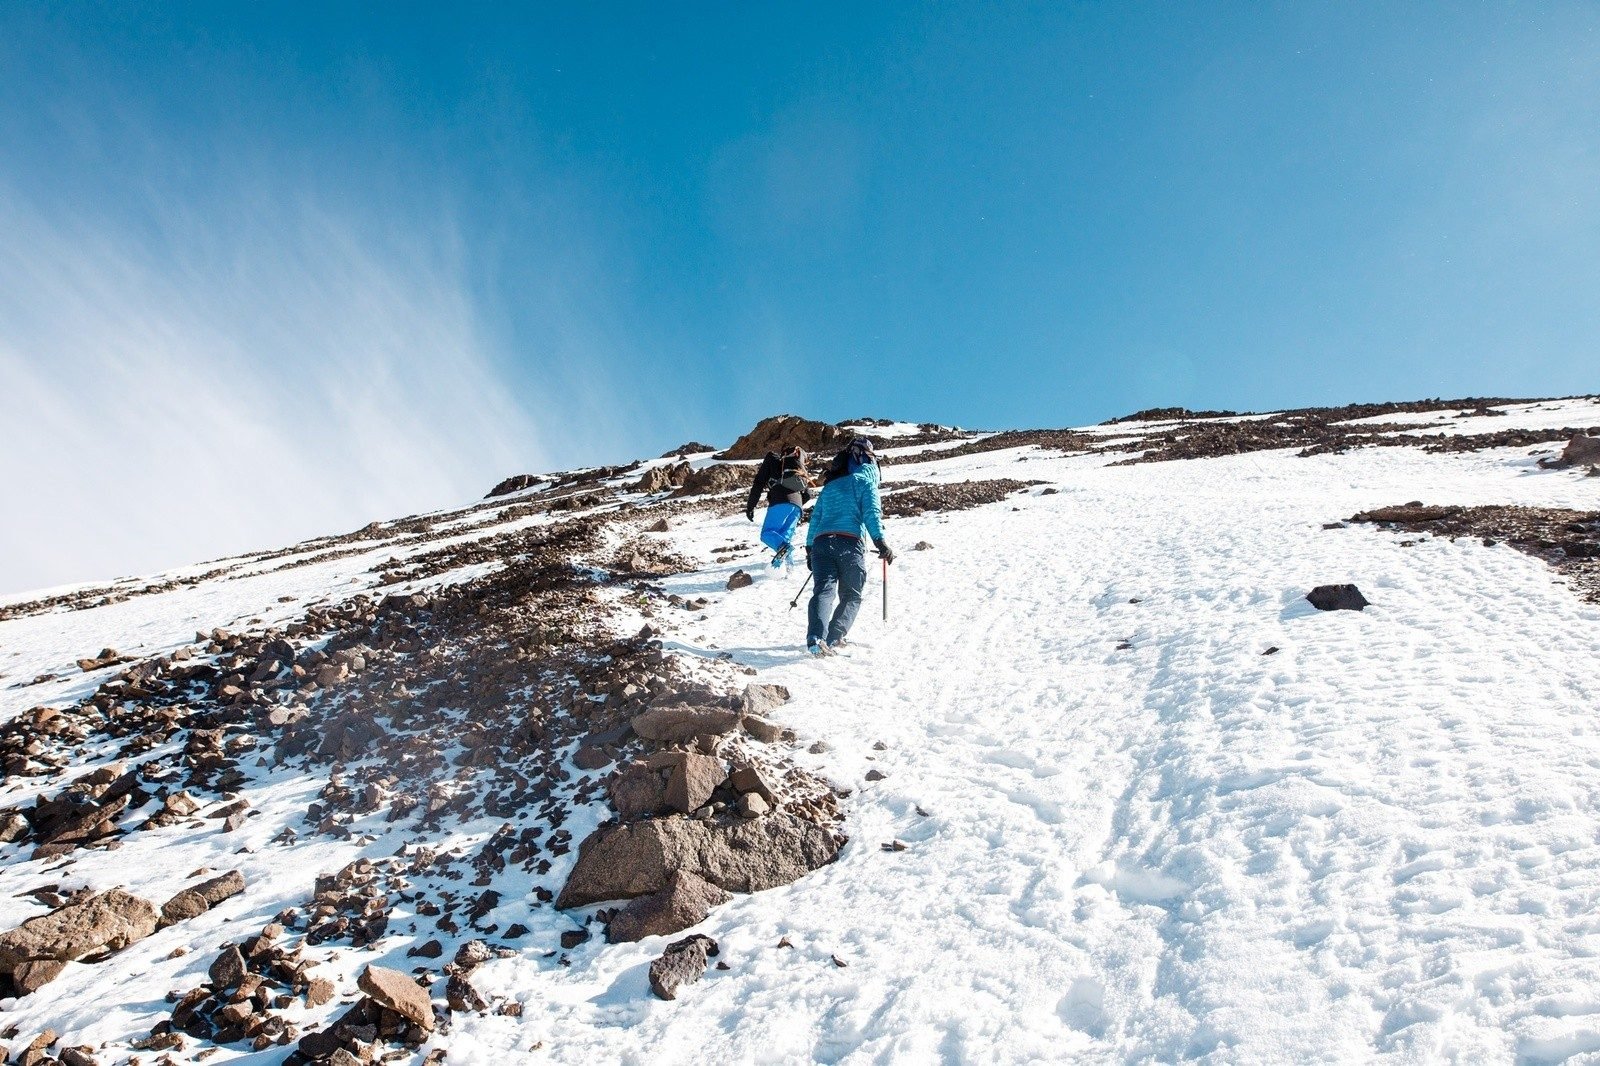 Mount Toubkal in winter, the highest mountain in North Africa